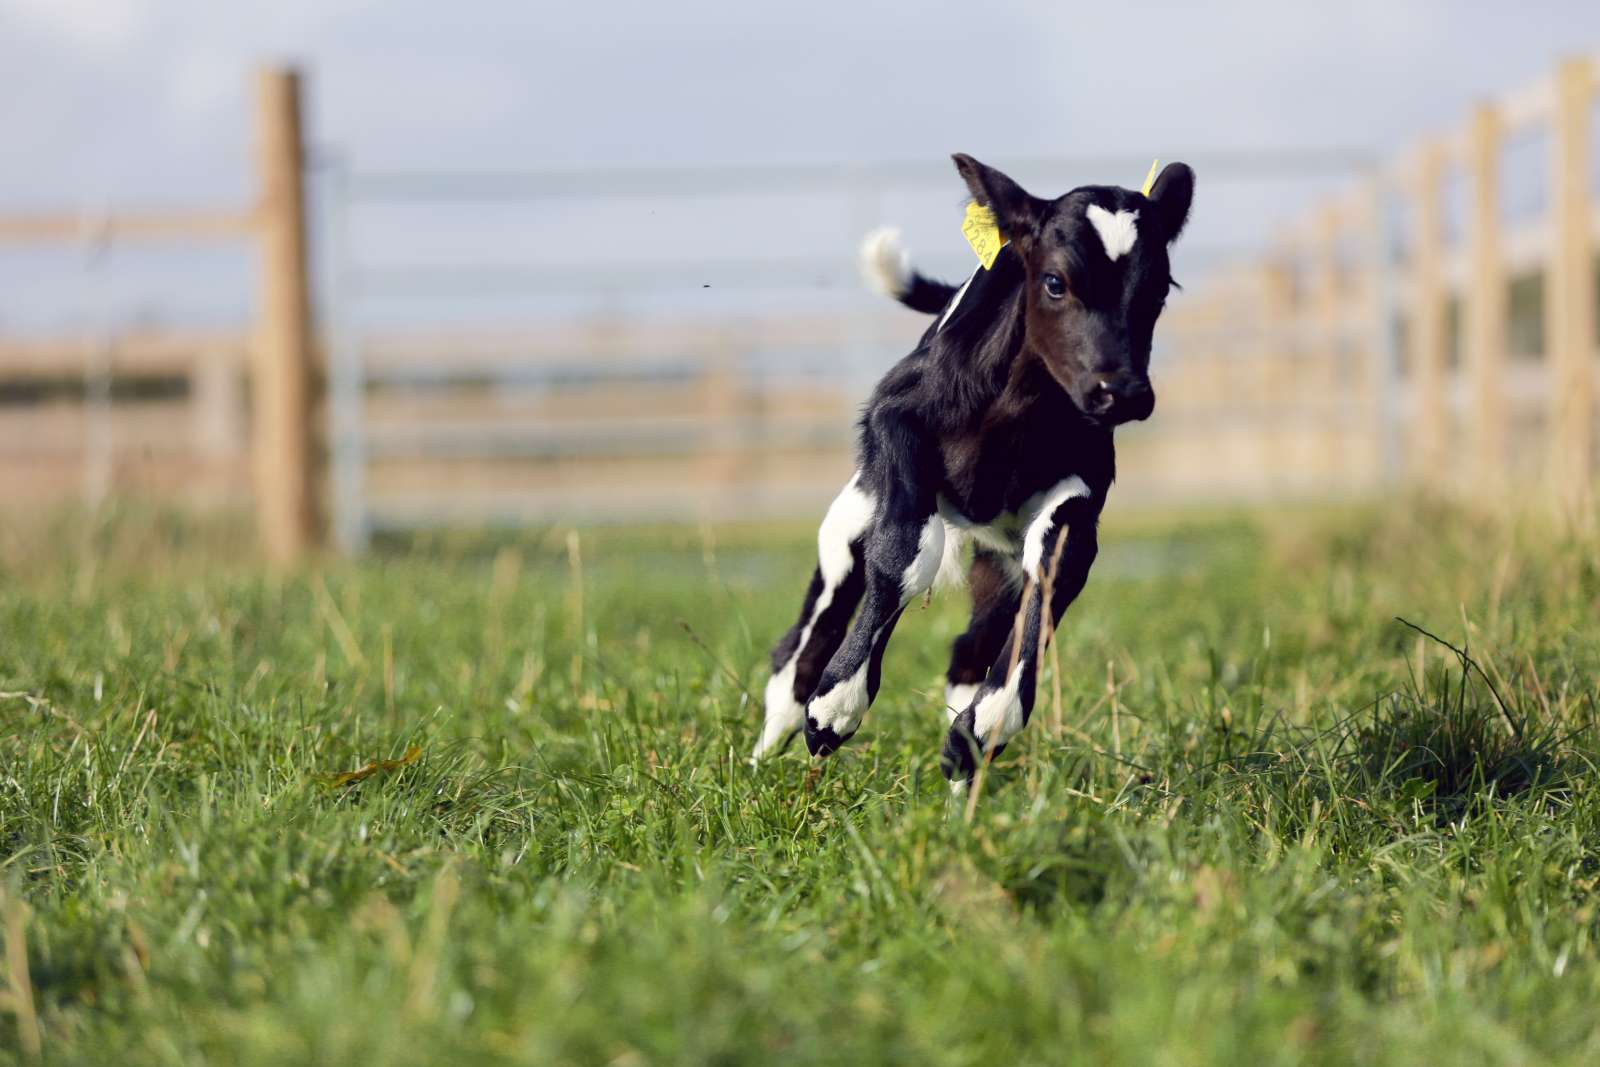 Cormac - First Cow at Eden Animal Farmed Sanctuary